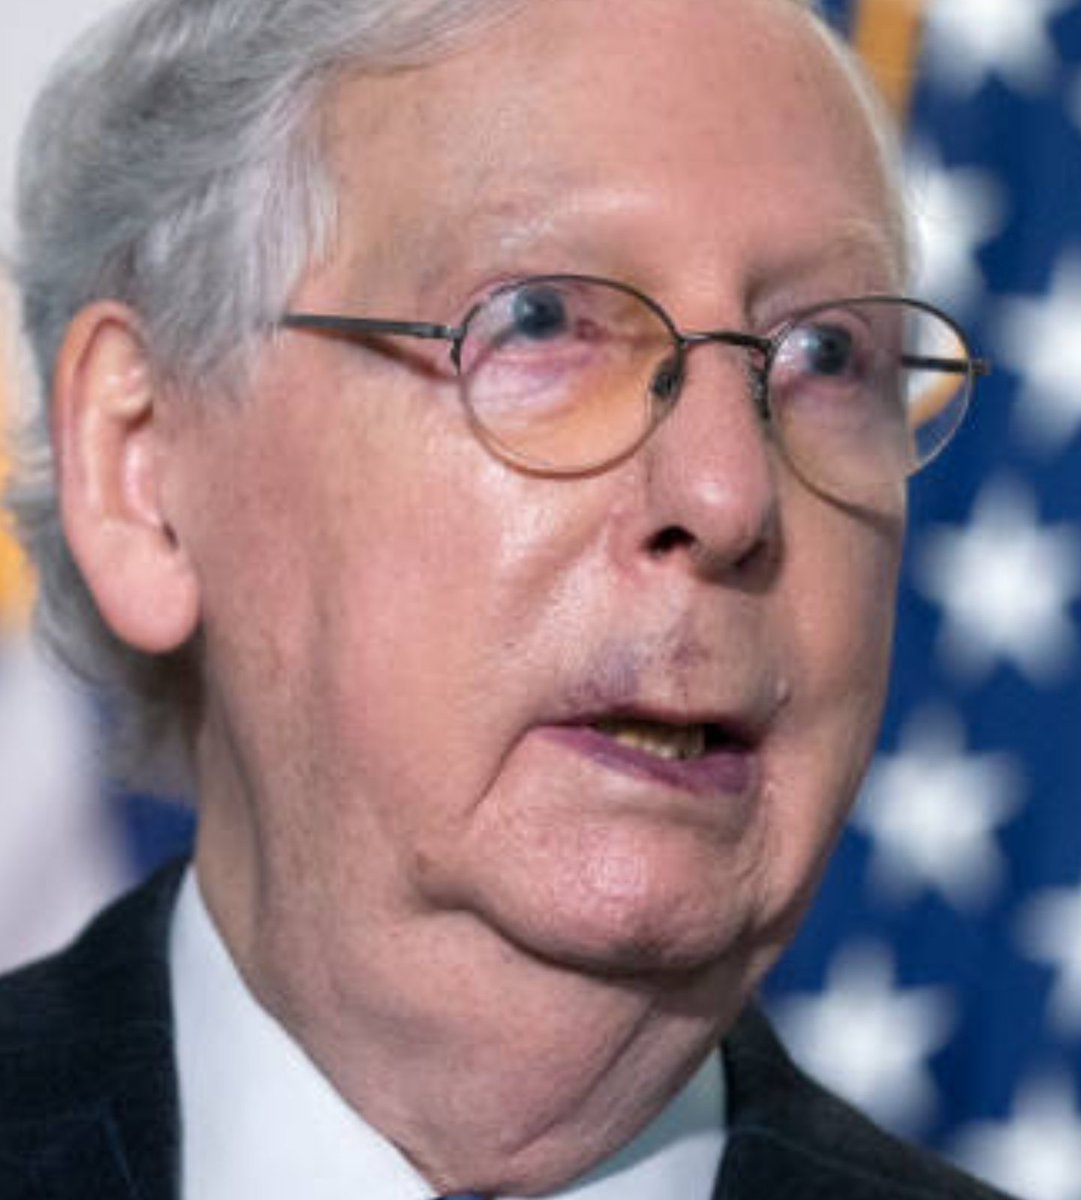 What is going on with Mitch McConnell's health?